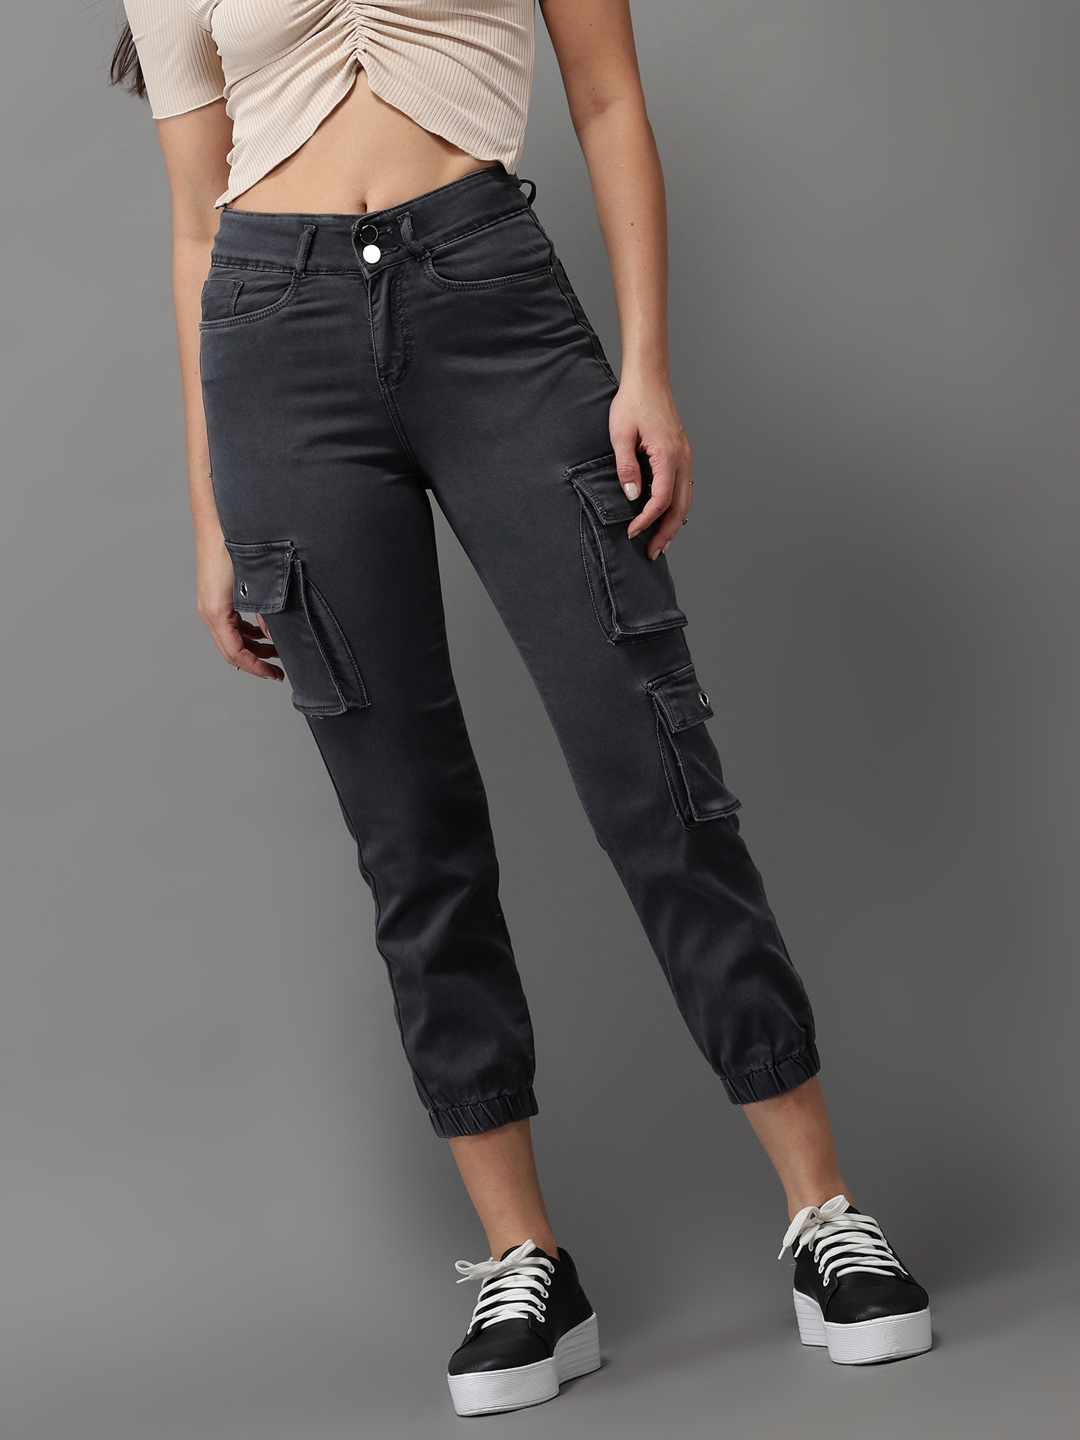 SHOWOFF Women's High-Rise Grey Clean Look Jeans